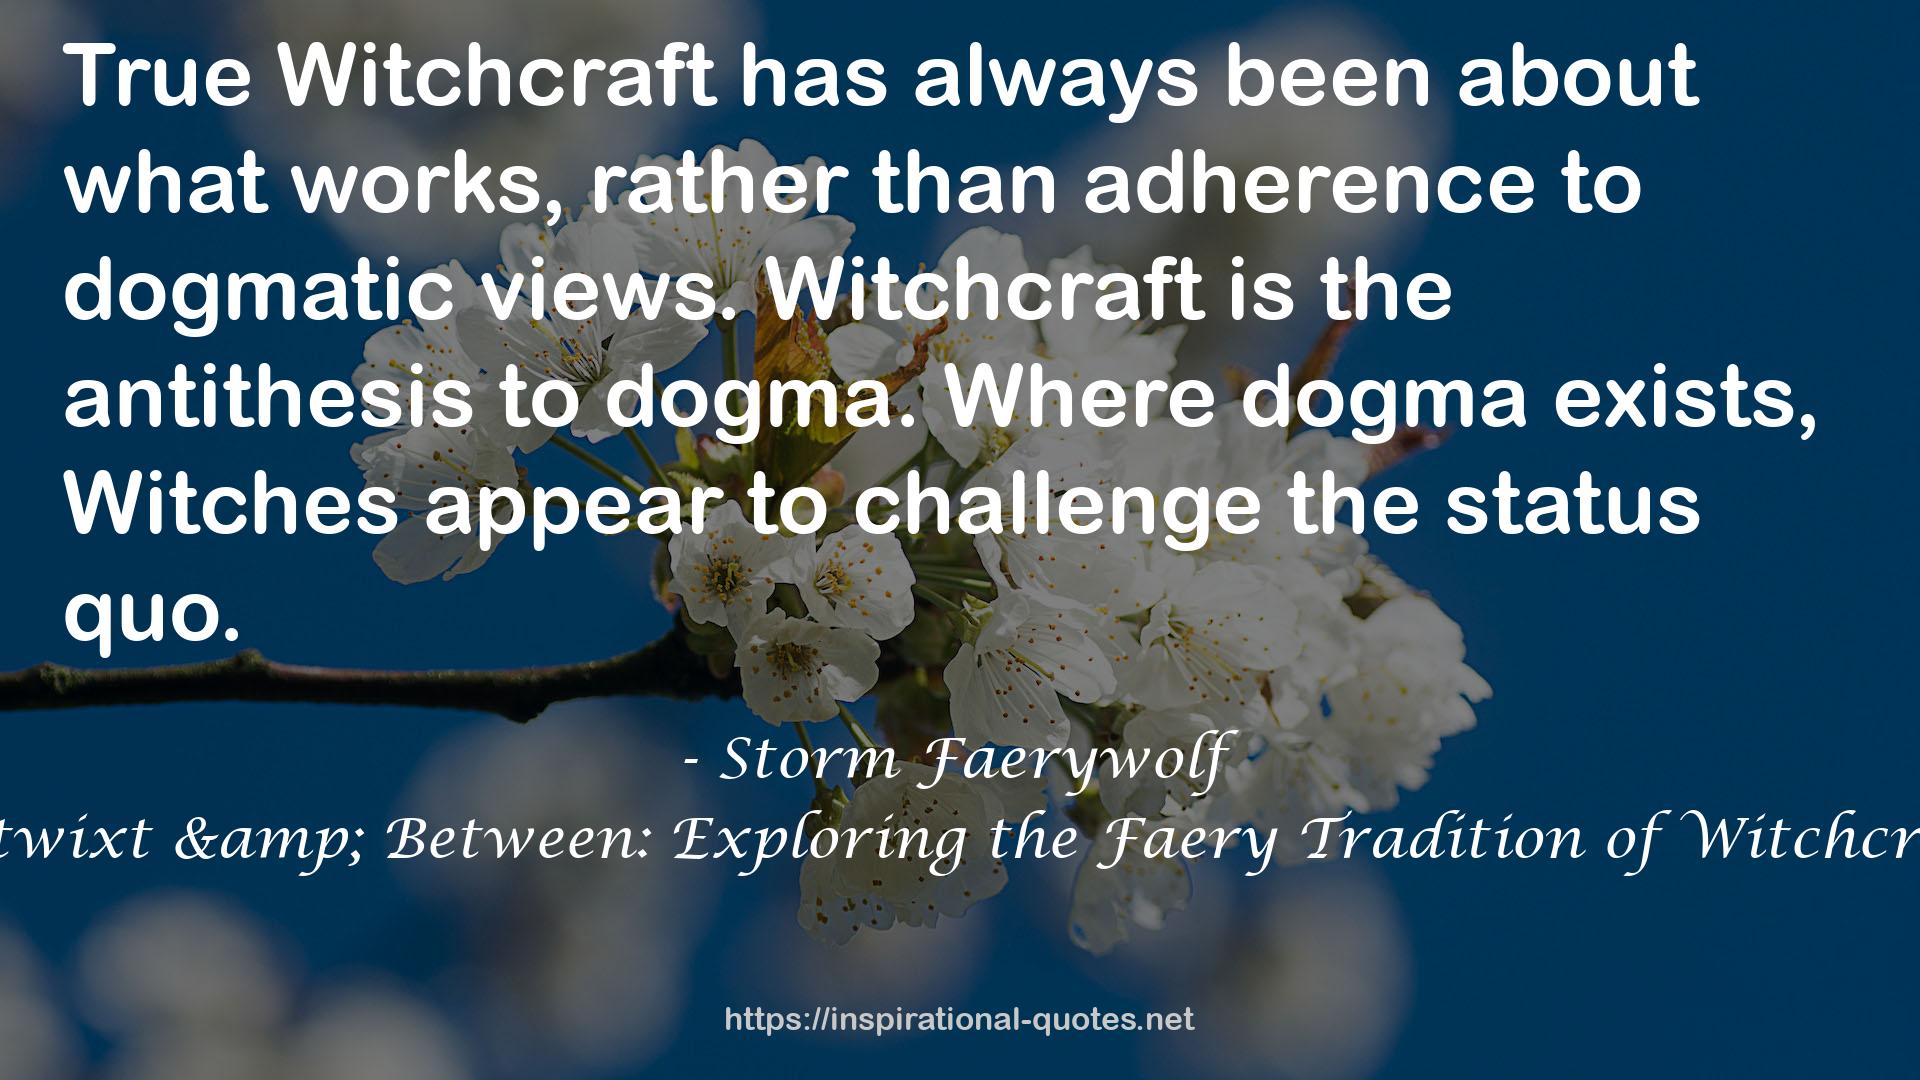 Betwixt & Between: Exploring the Faery Tradition of Witchcraft QUOTES